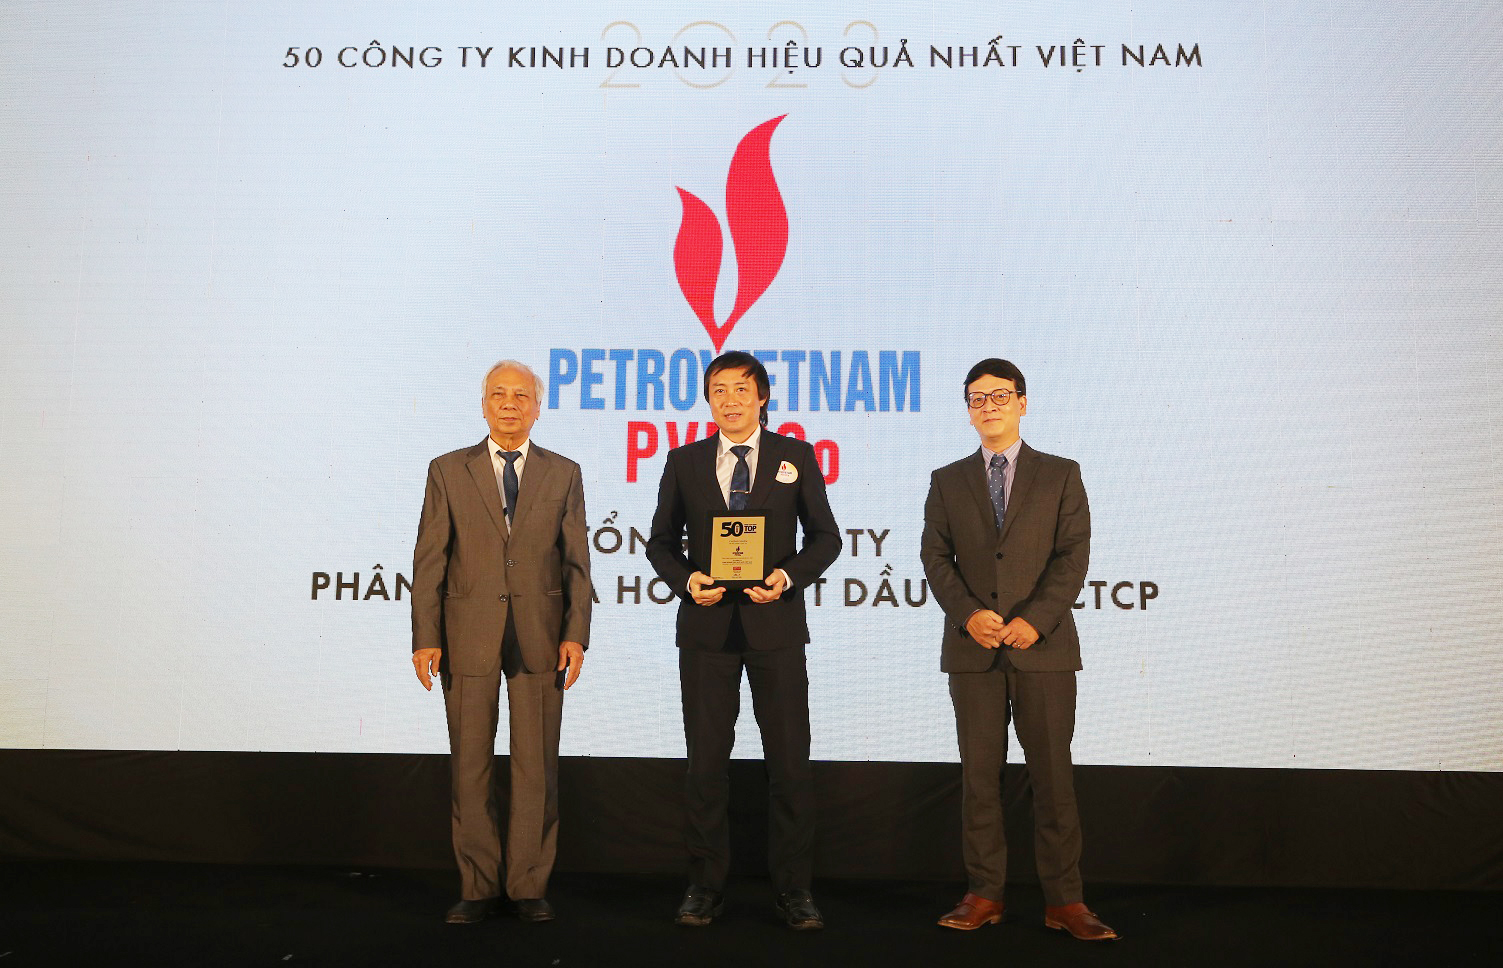 PVFCCo has been honored as one of the “Top 50 Most Efficient Corporations in Vietnam.”